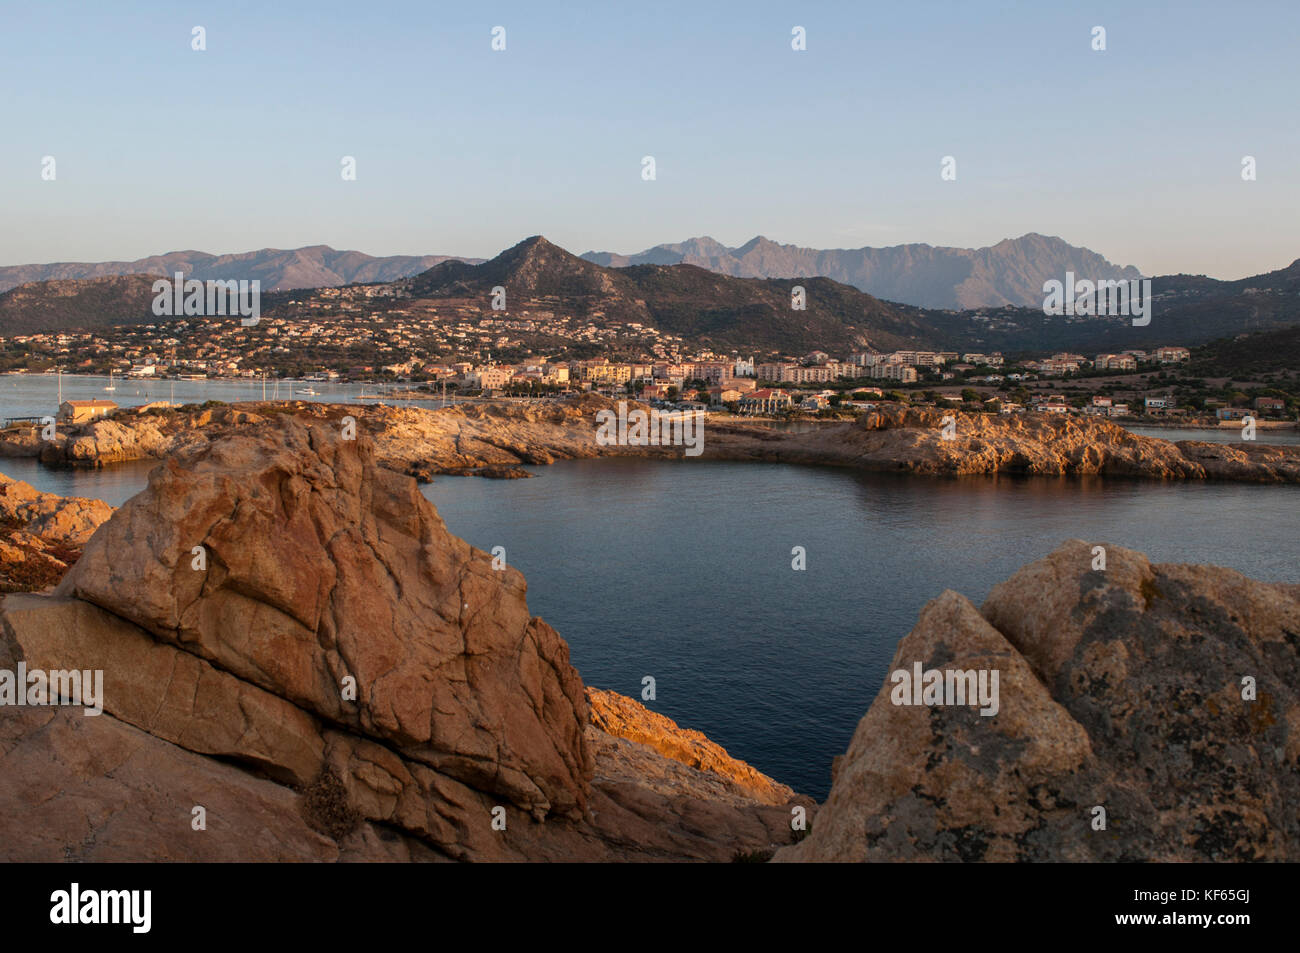 Corsica: sunset and the skyline of Ile-Rousse (Red Island), the famous city of the Upper Corsica, with view of the port and the boats Stock Photo